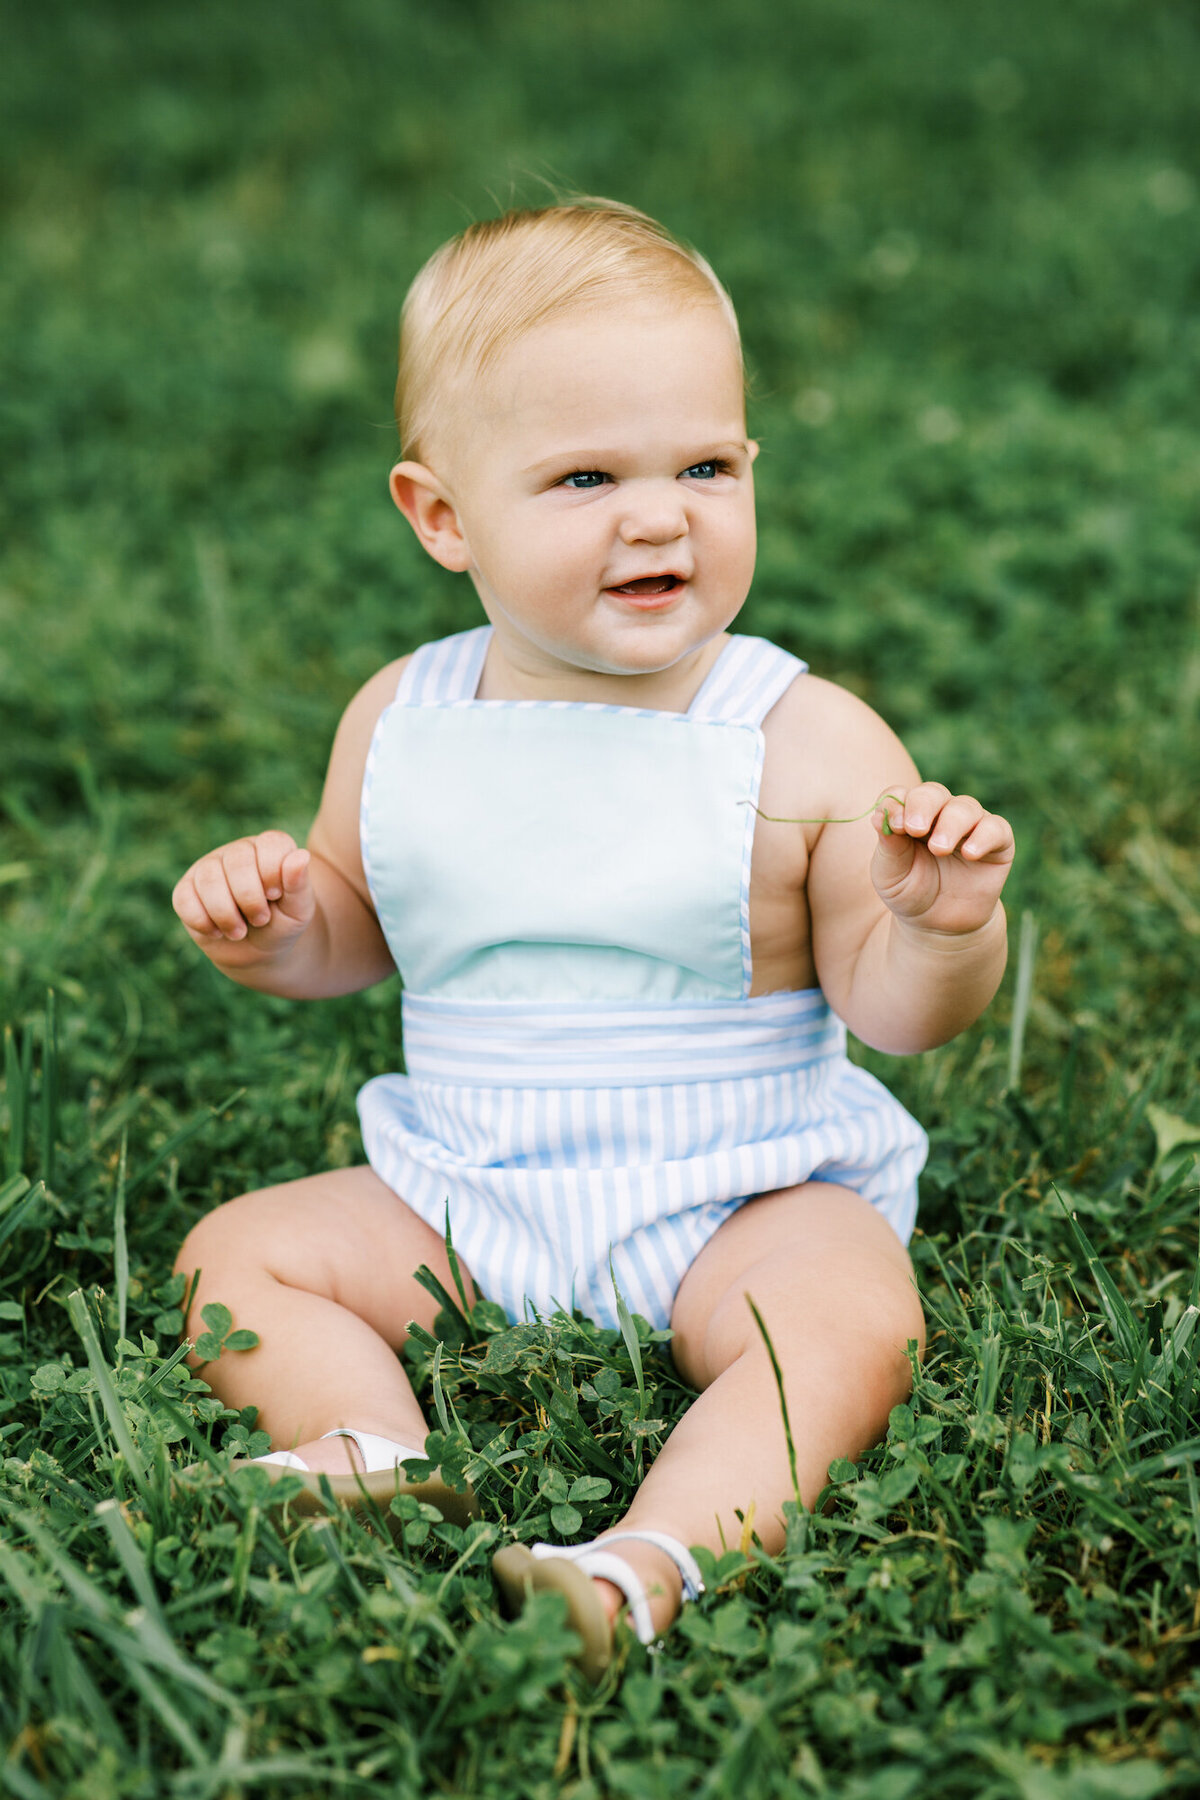 Daimler_9_Months_Abigail_Malone_Photography_Knoxville-5